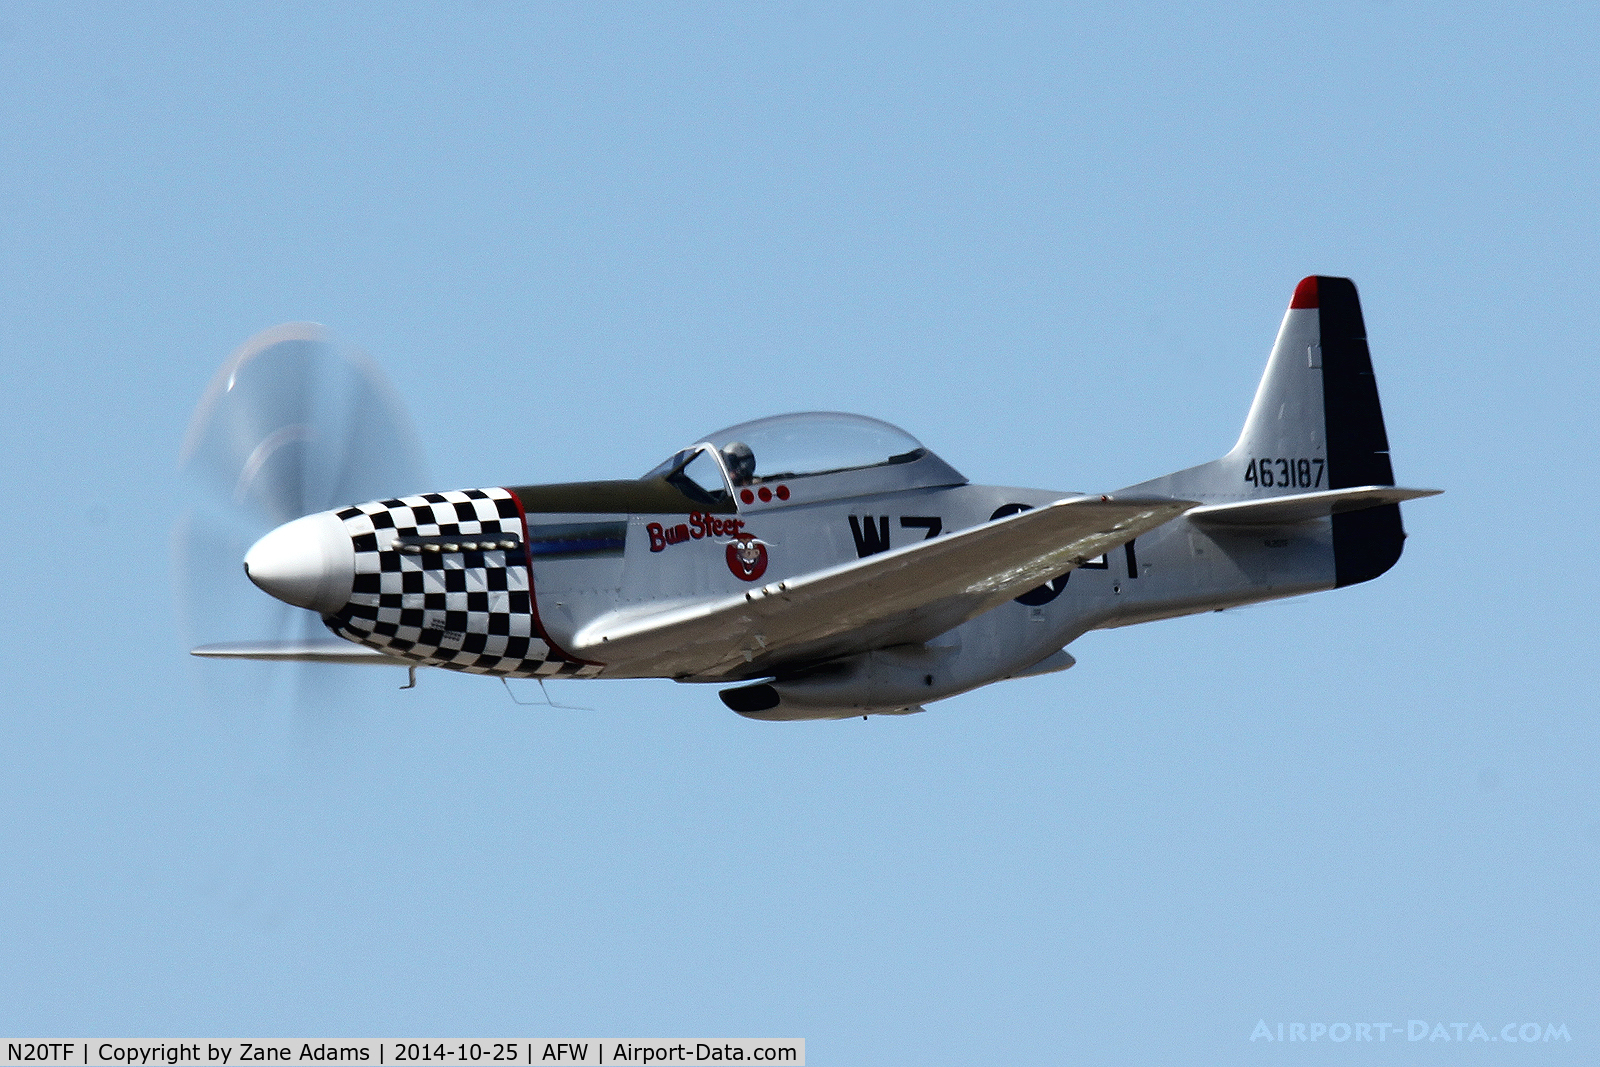 N20TF, 1967 North American (Cavalier) TF-51D Mustang C/N AF67-14866, At the 2014 Alliance Airshow - Fort Worth, TX